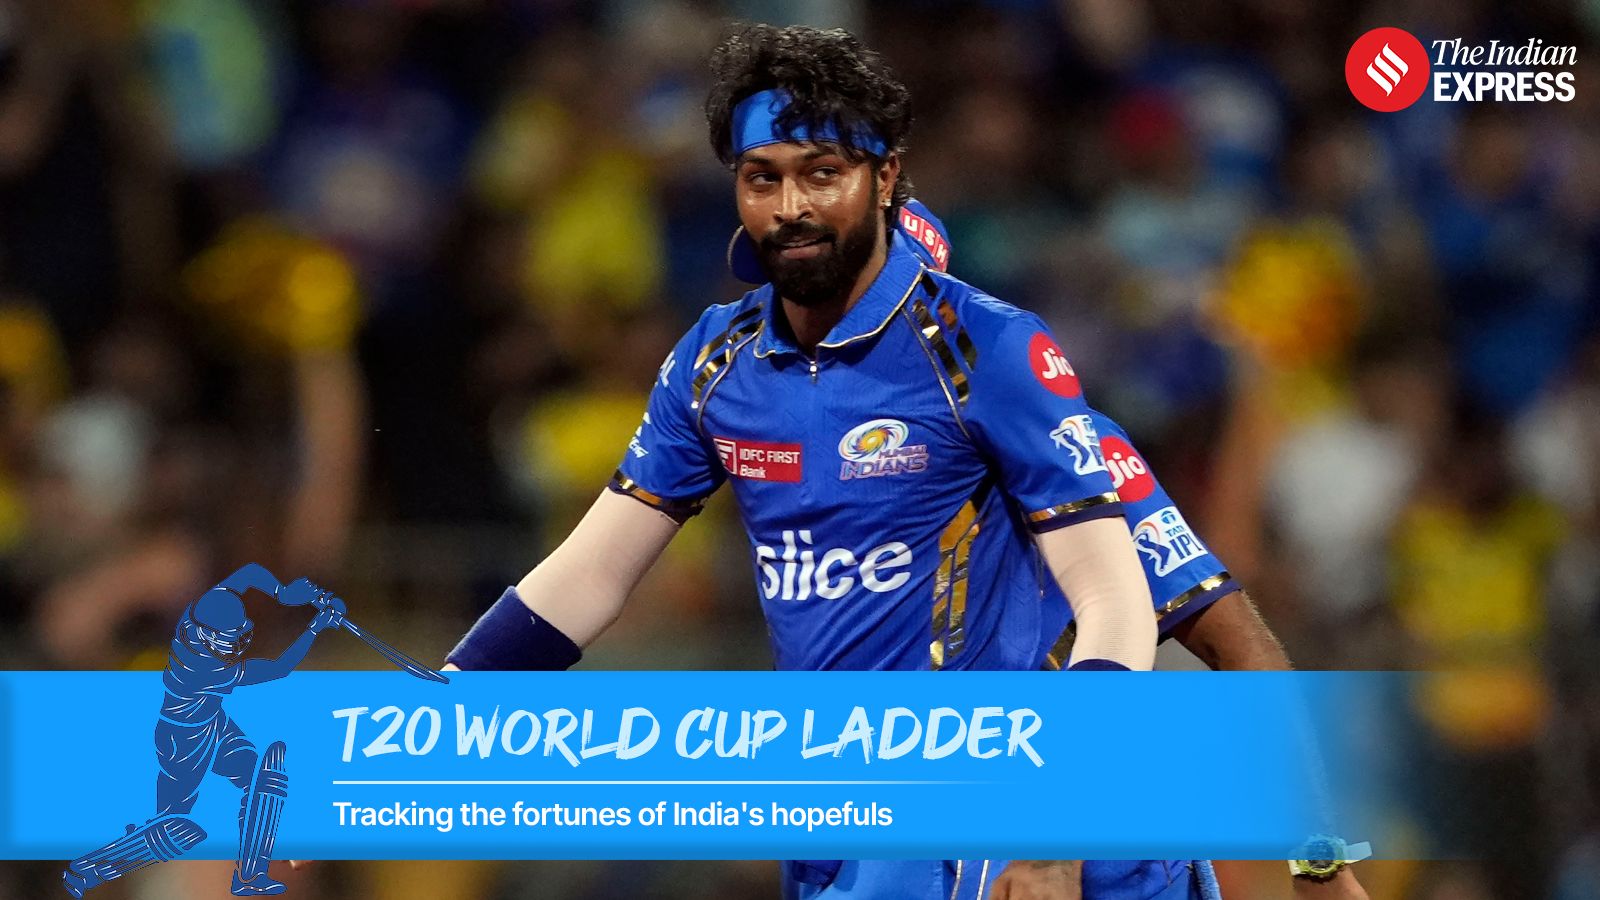 android, t20 world cup ladder: hardik pandya drops out from top 15; shivam dube, yuzvendra chahal soar in week 4 of our rankings